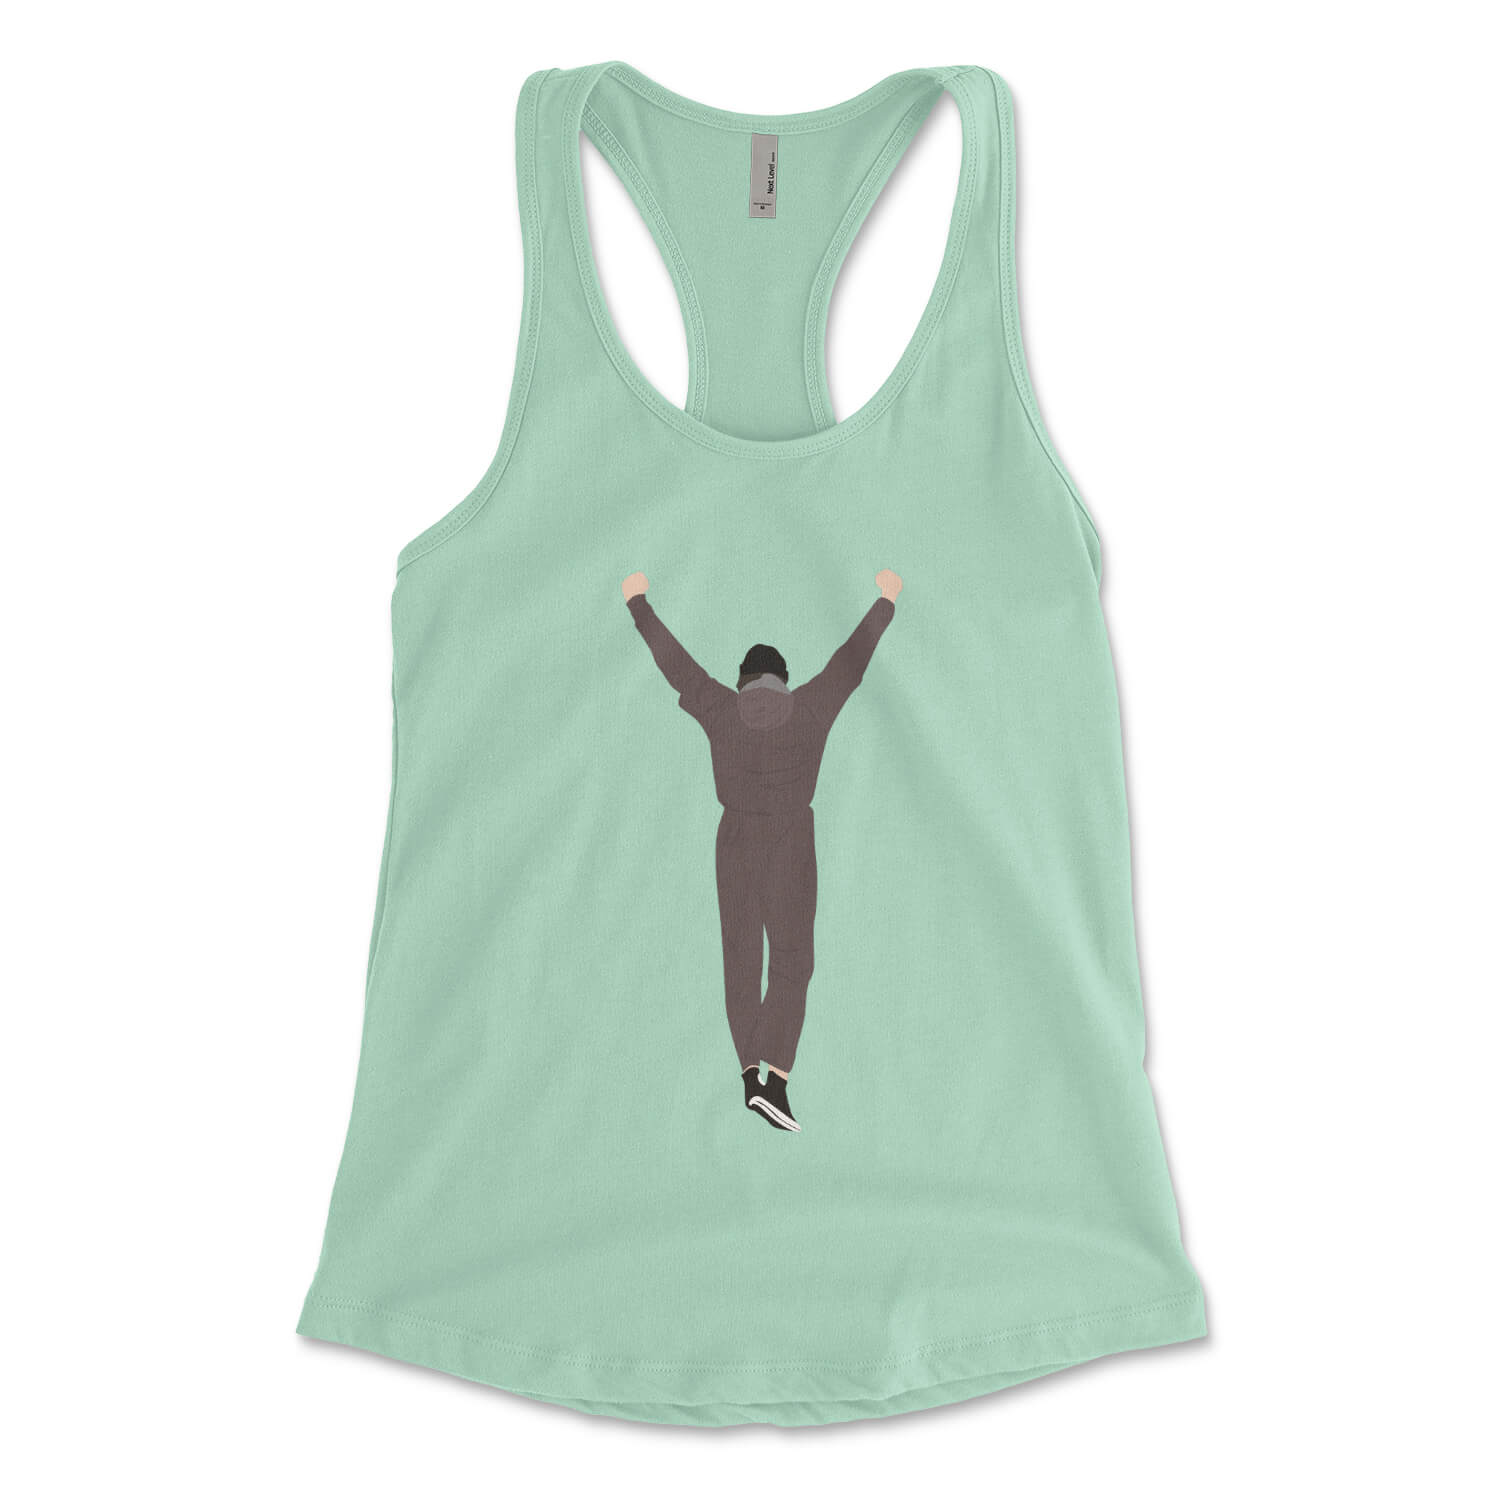 Rocky mint green womens racerback tank top from Phillygoat